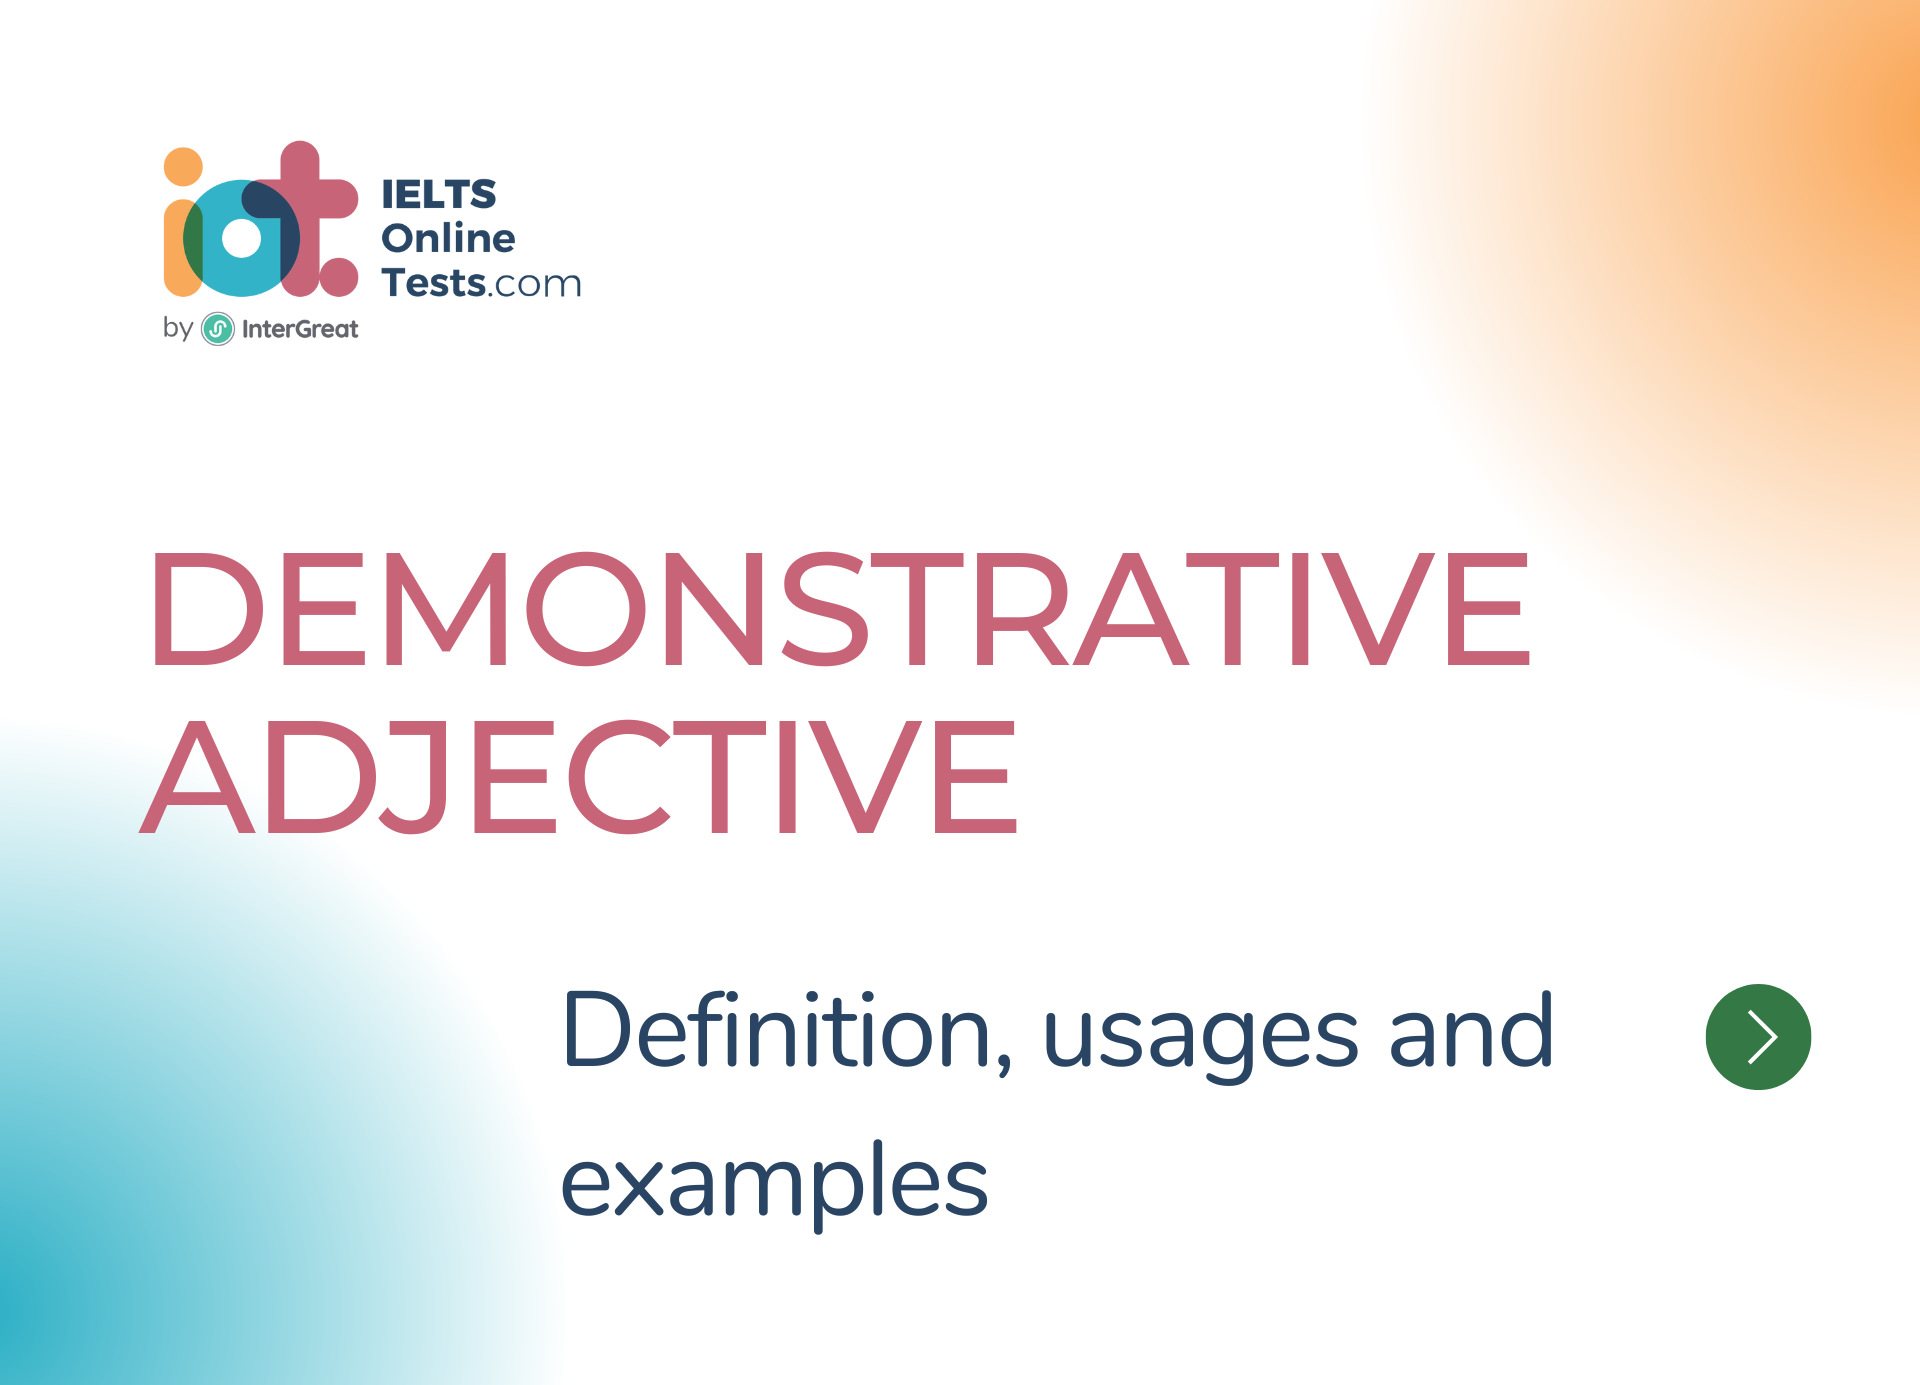 Demonstrative Adjective definition, usages and examples